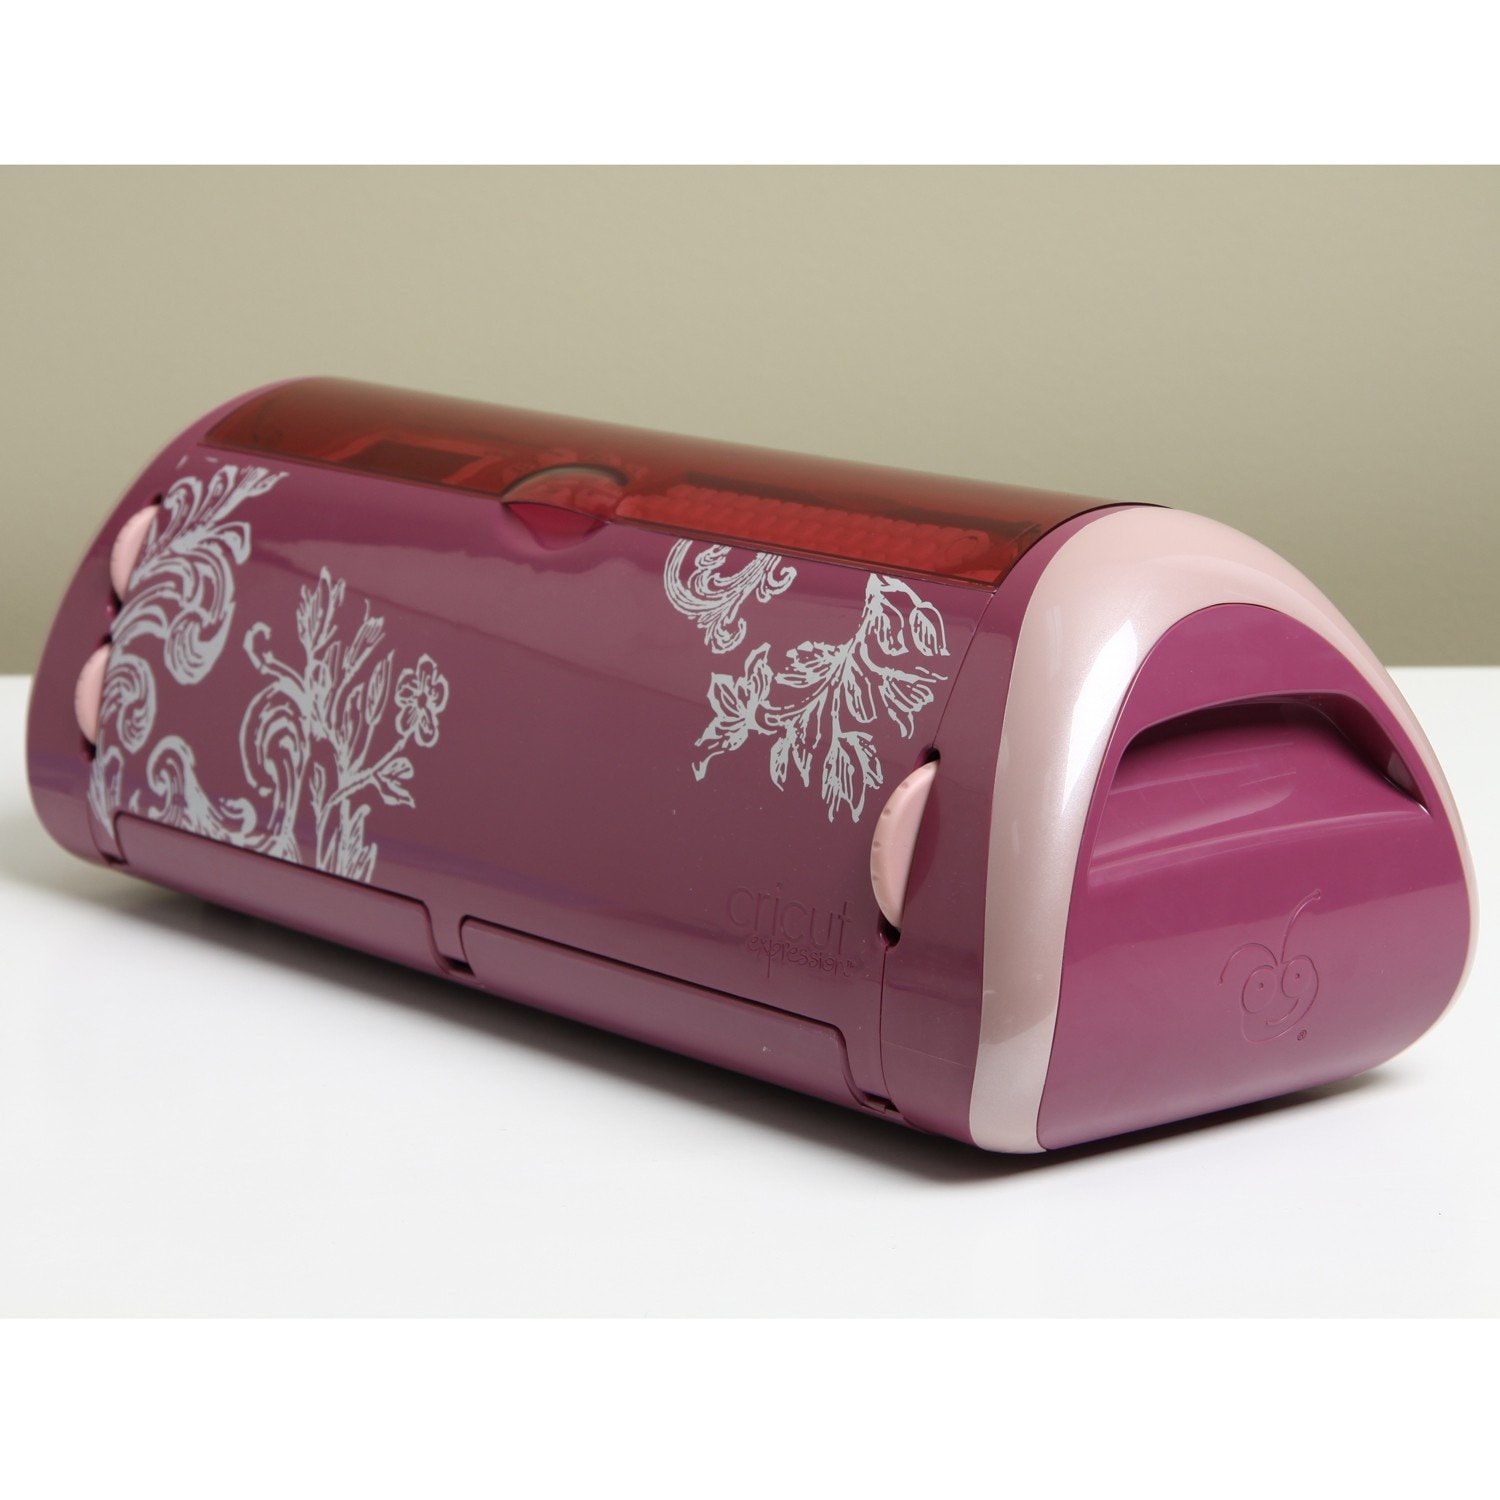 Cricut Expression Plum Die Cutting Machine with Two Cartridges - Bed Bath &  Beyond - 6612360